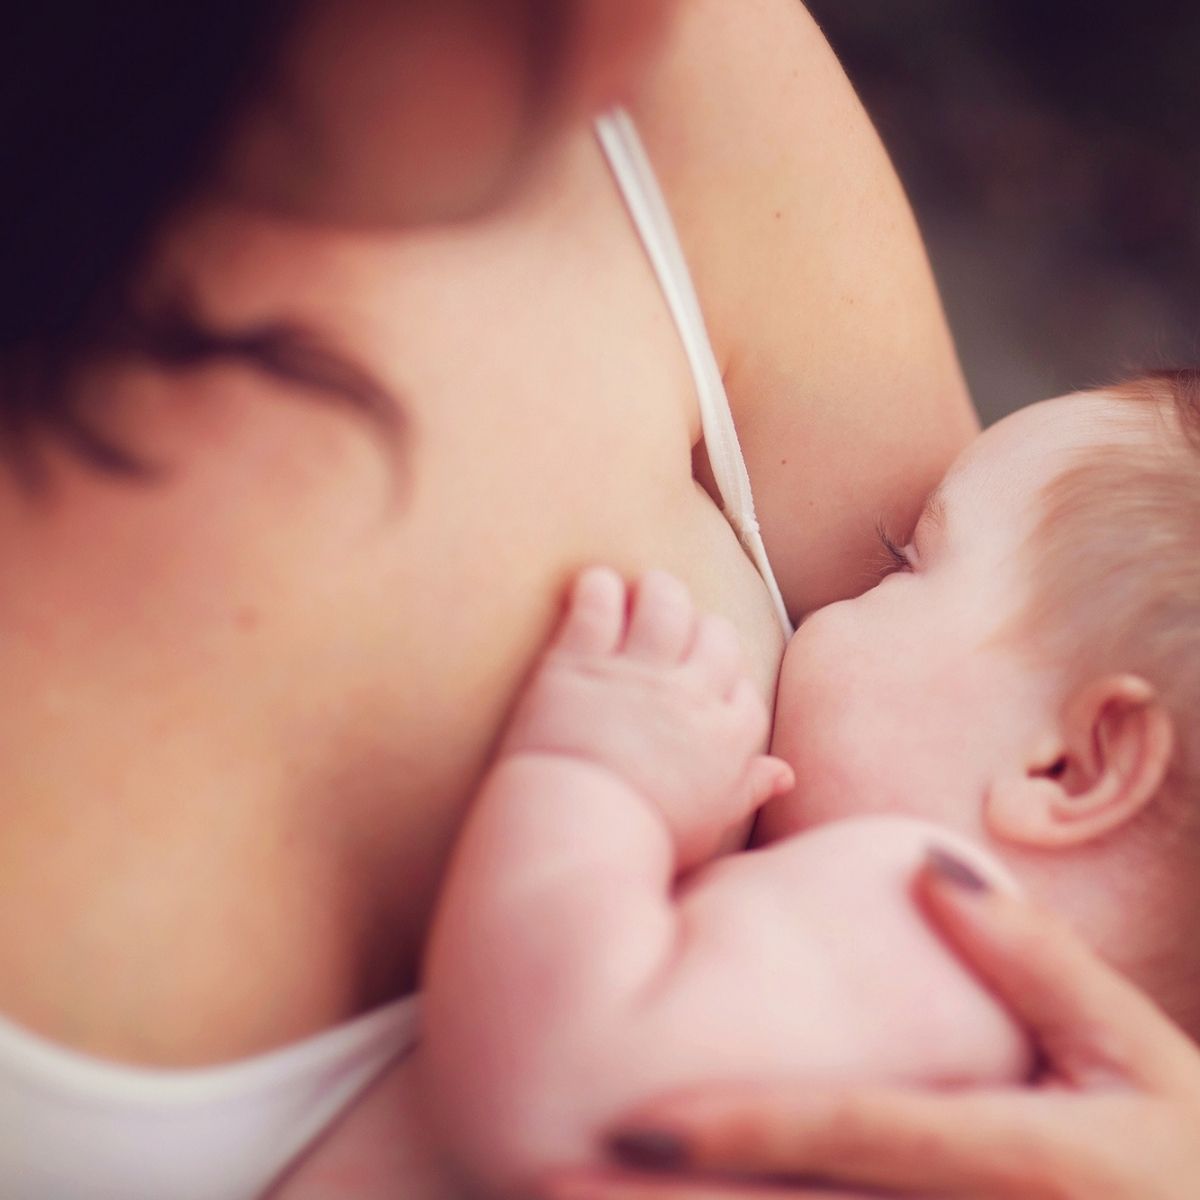 What Do I Do If My Baby Doesn’t Want to Breastfeed?